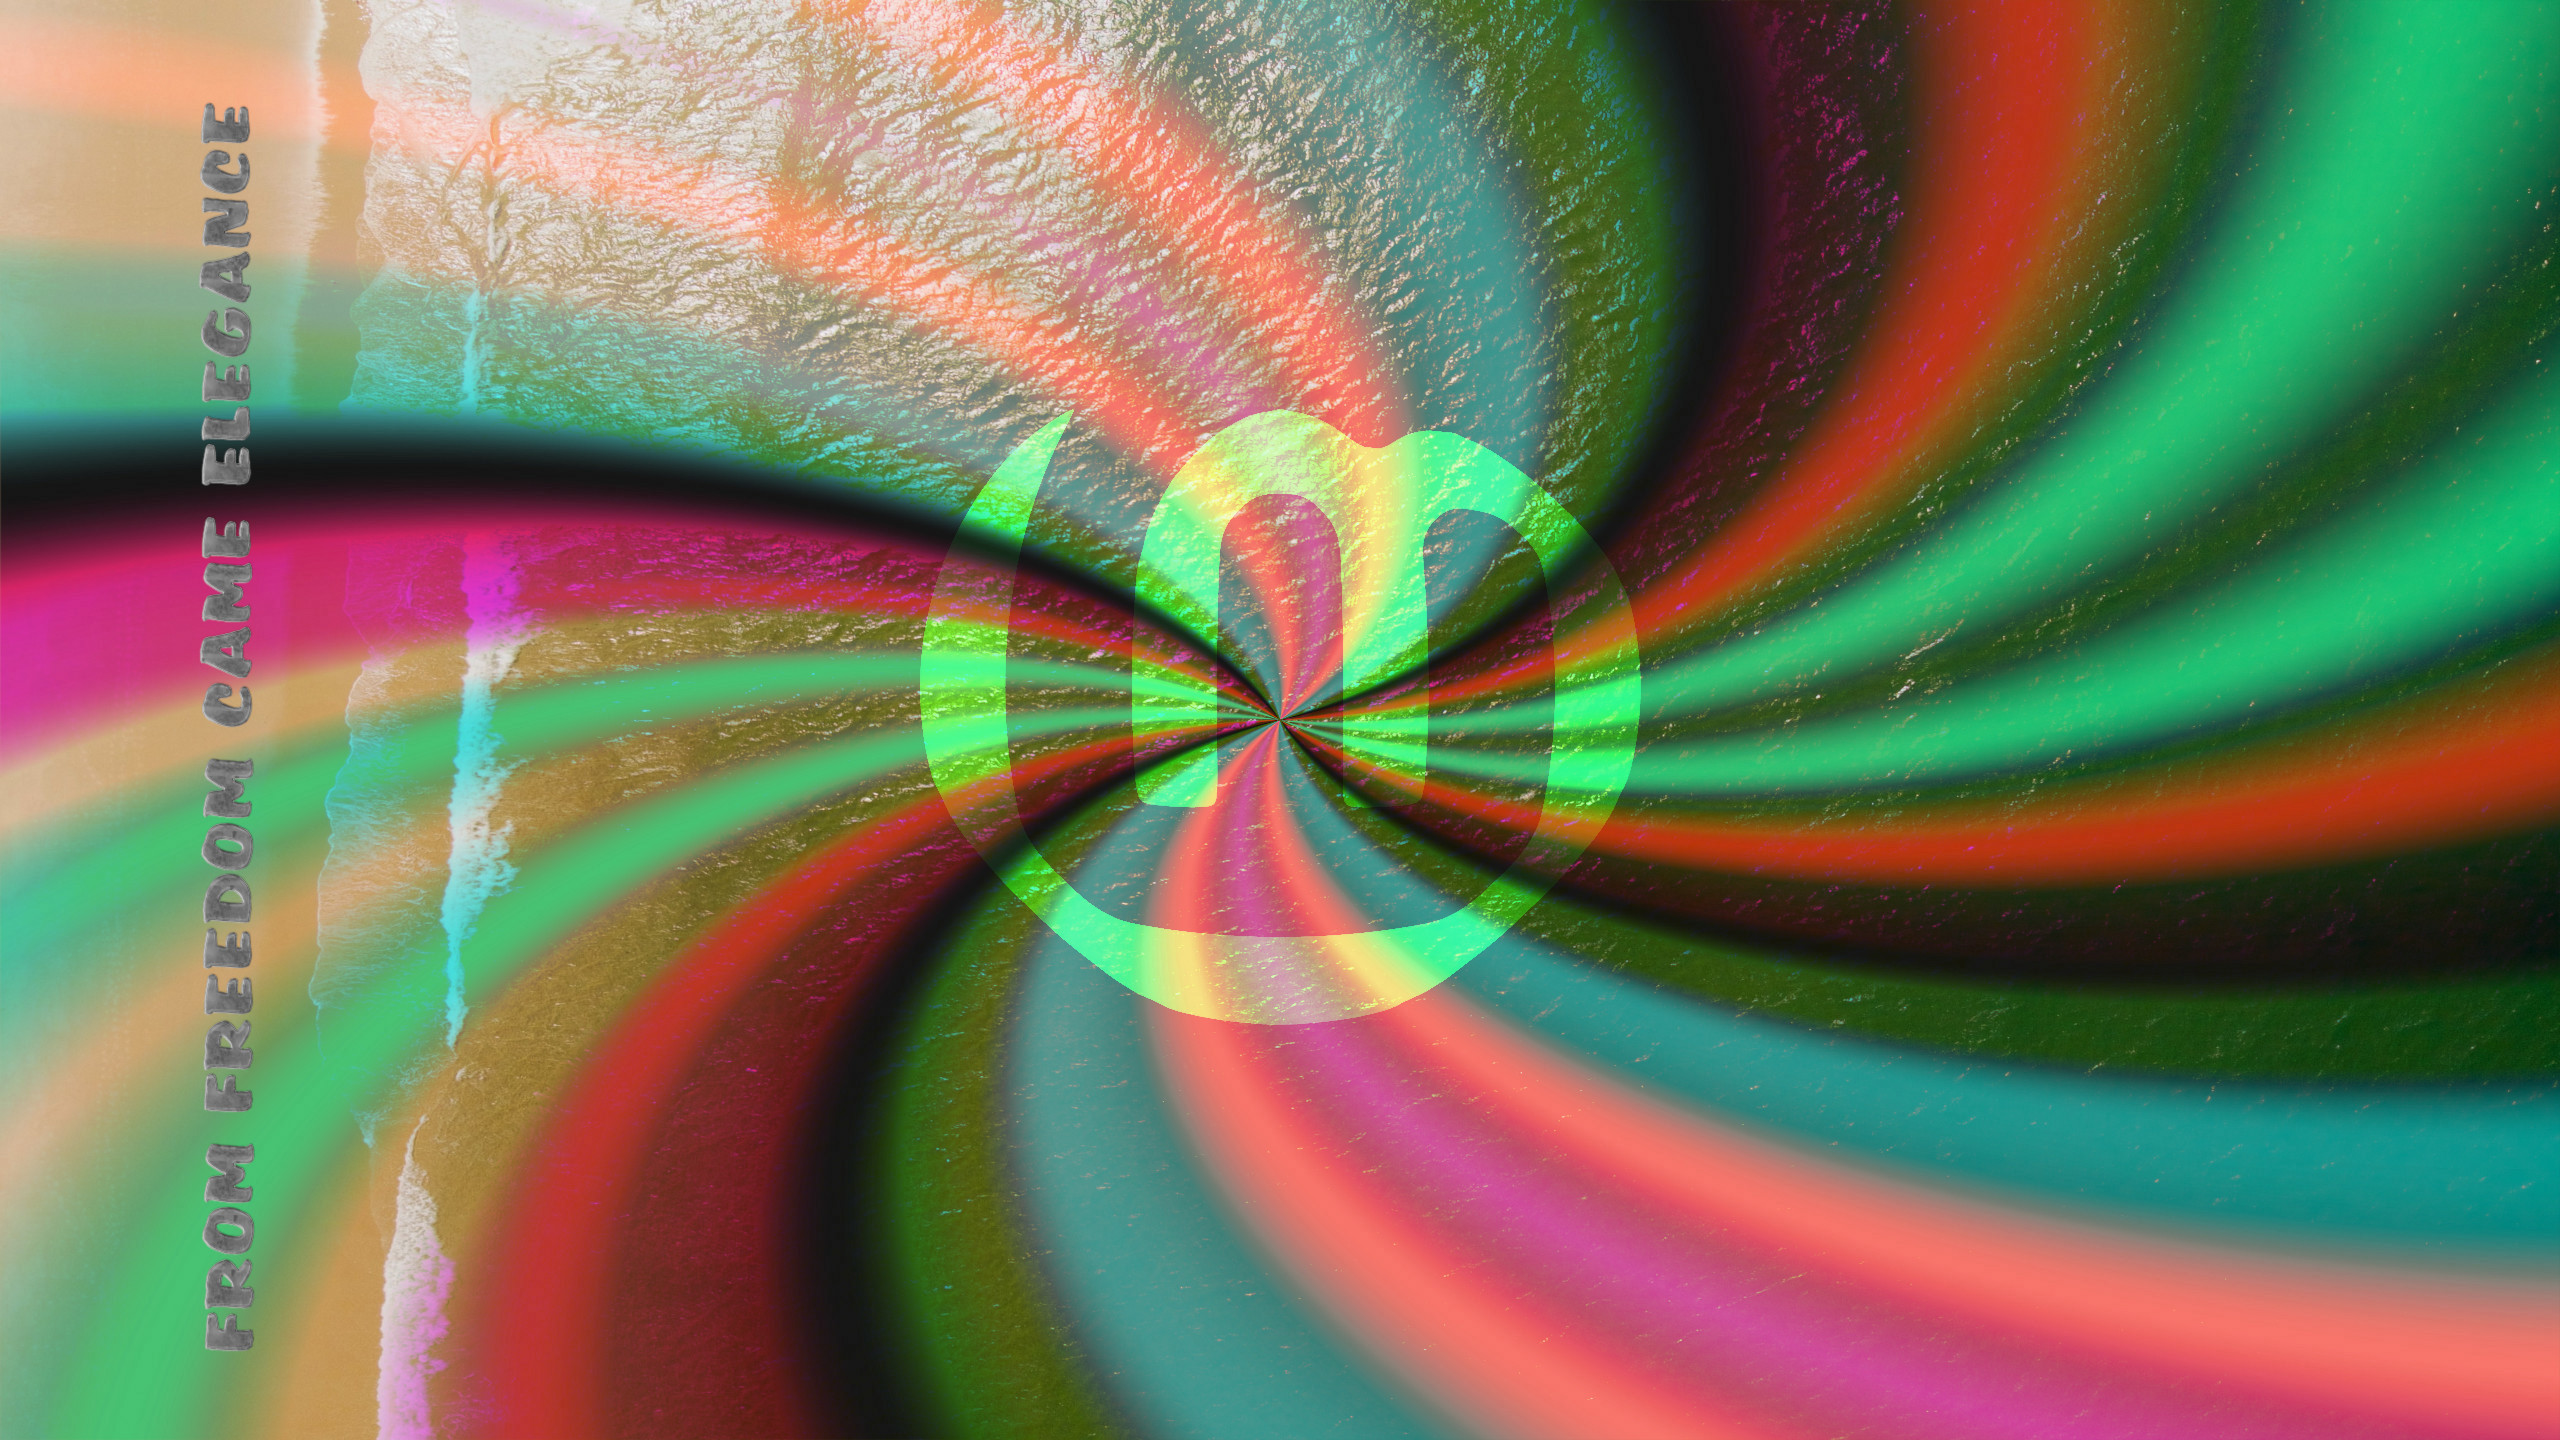 General 2560x1440 Linux Linux Mint technology digital art text operating system colorful swirls logo